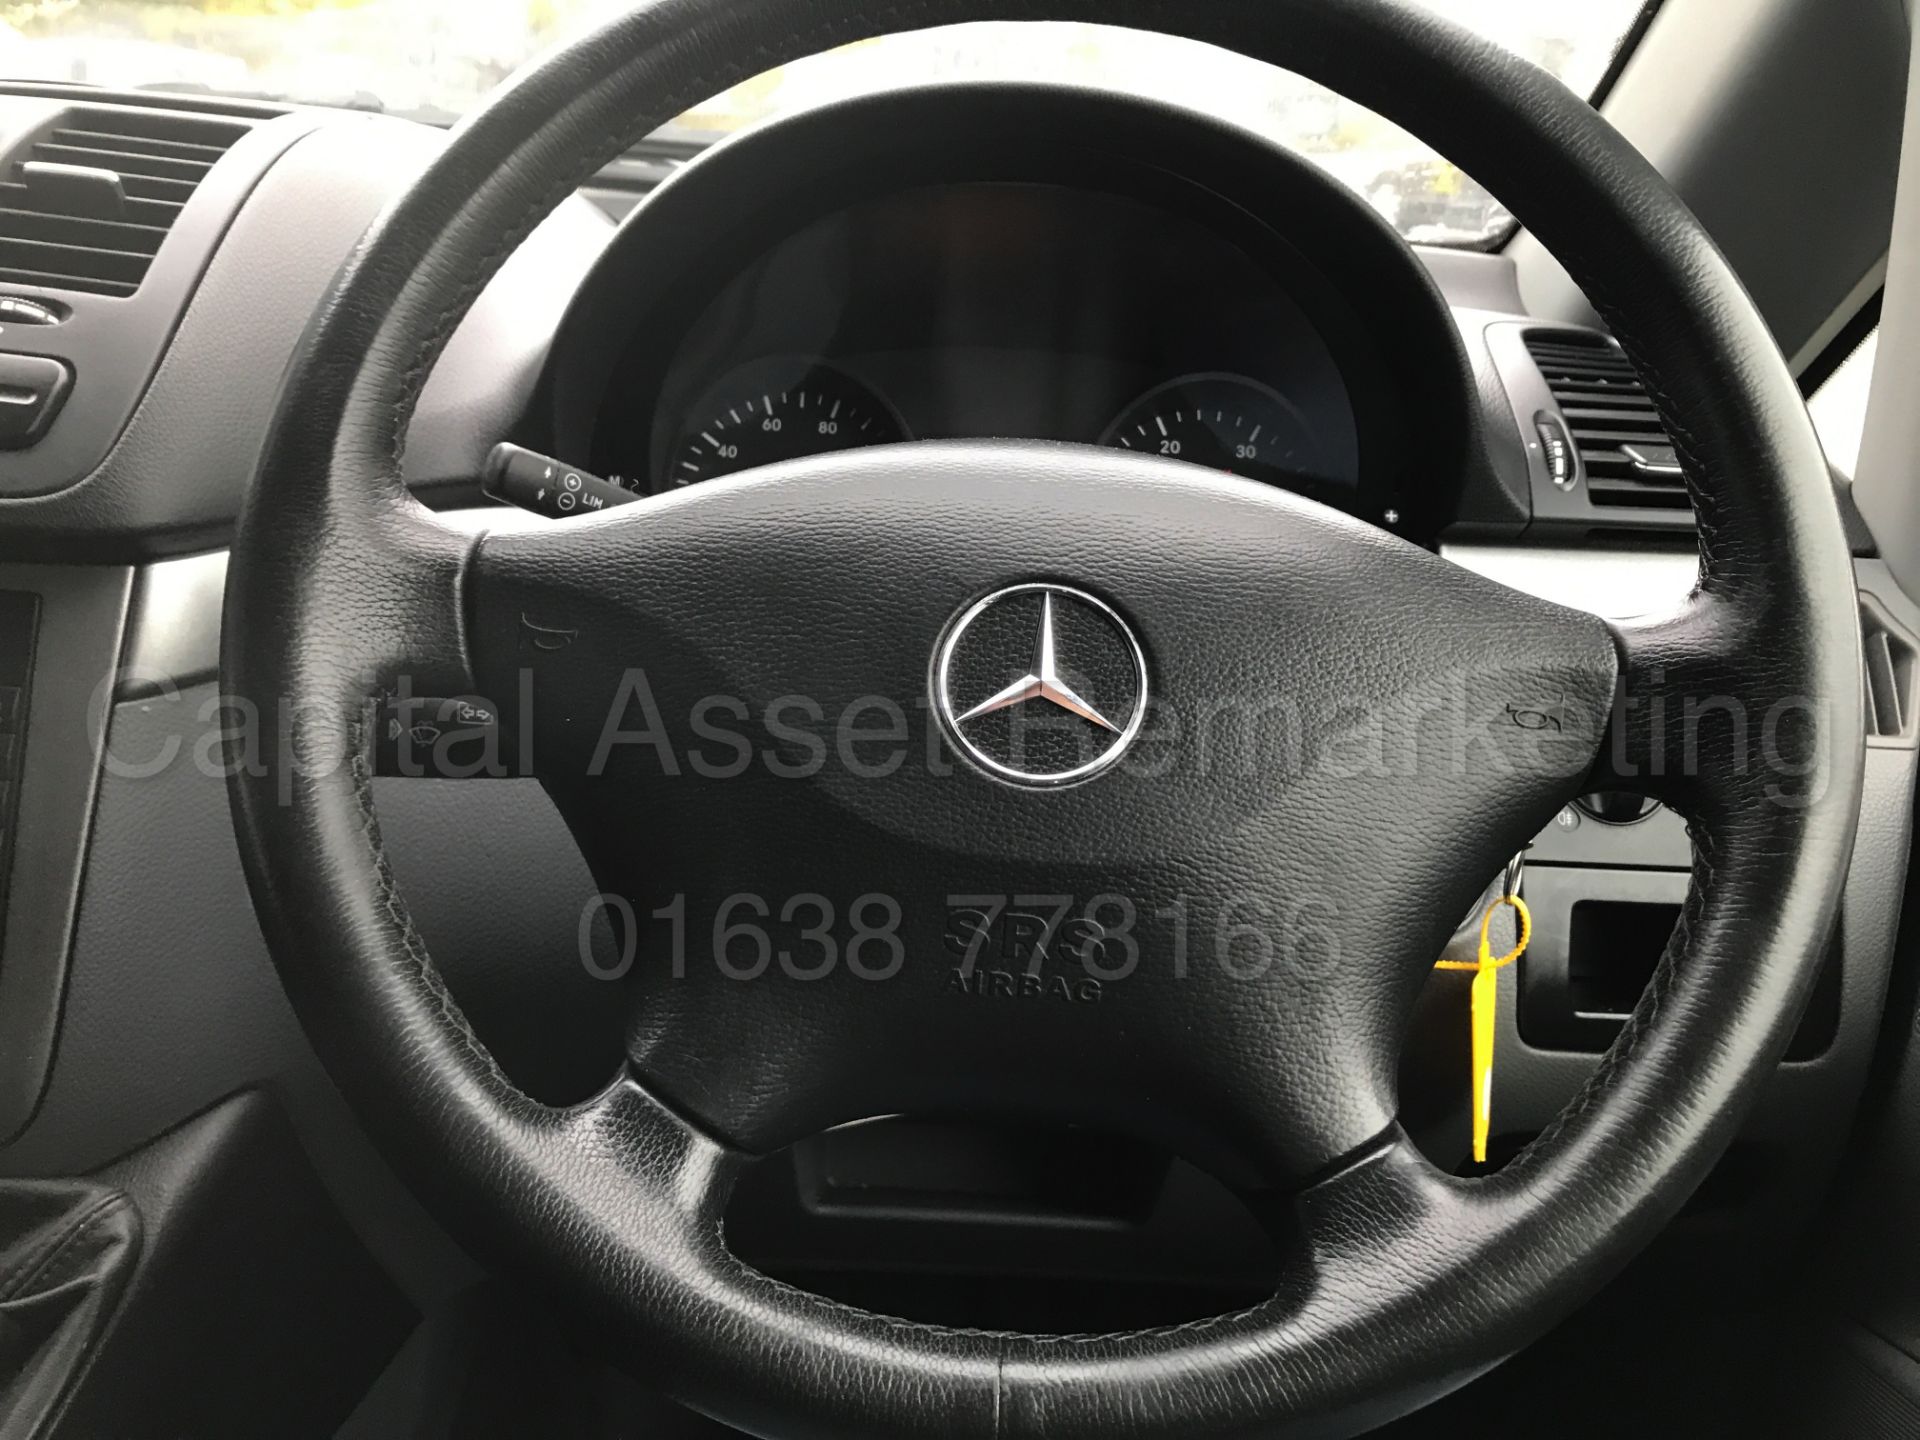 MERCEDES VITO *SPORT* '5 SEATER DUELINER' (2010 - 10 REG) '2.1 CDI - 150 BHP - 6 SPEED' **AIR CON** - Image 31 of 35